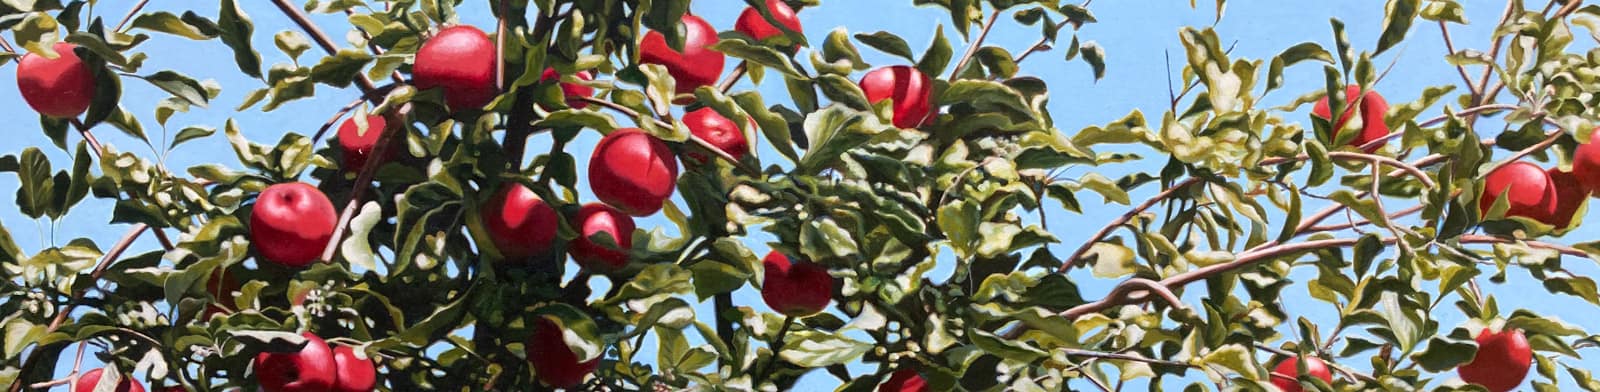 Photorealist painting by Josonia Palaitis depicting an apple tree with a blue sky backdrop with scores of ripe red apples ready to pick